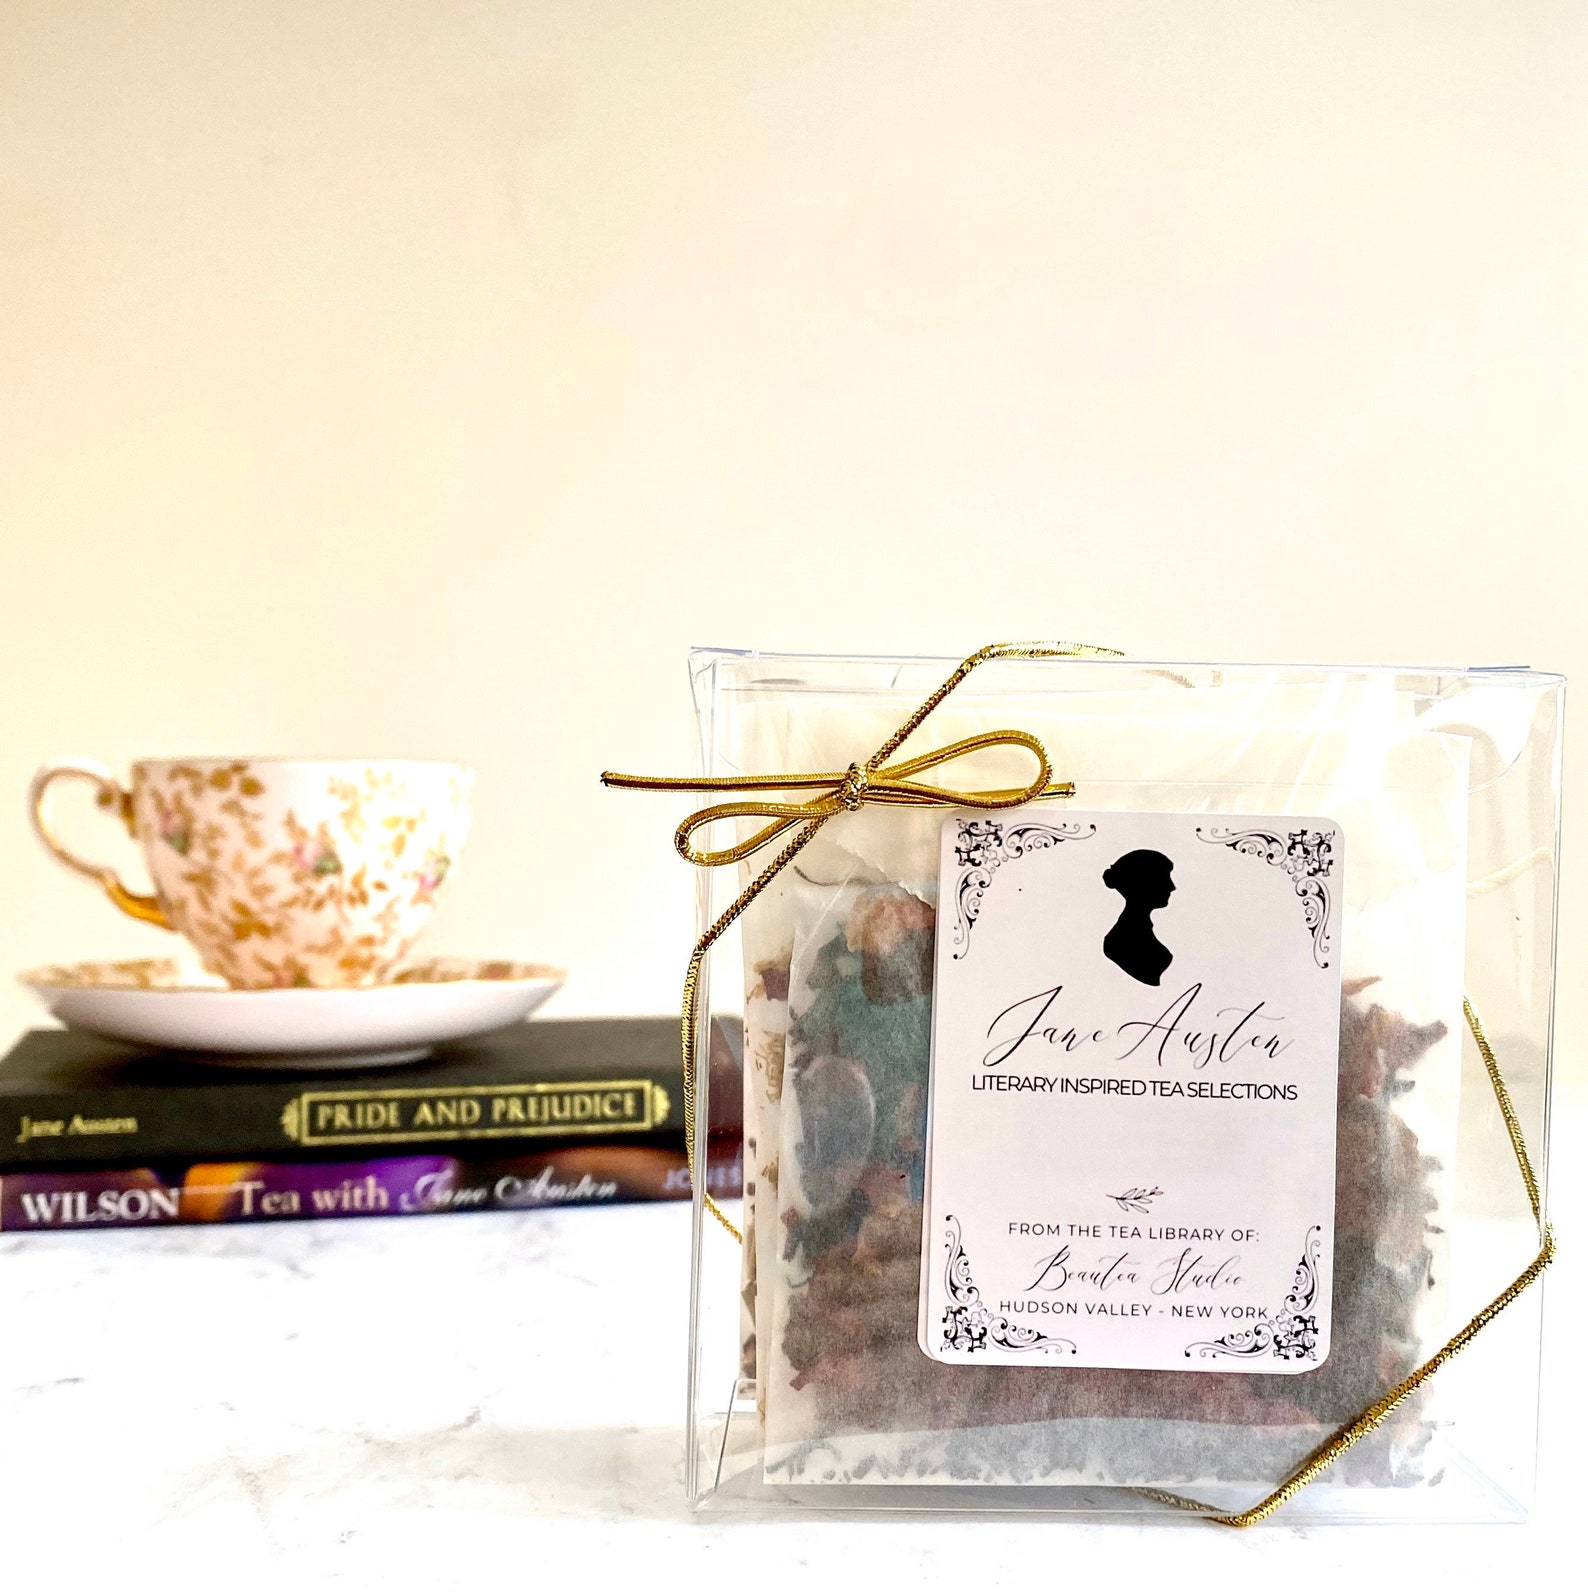 a selection of tea labeled "Jane Austen Literary inspired Tea Selections" in the forefront, with a tea cup and saucer sitting on top of two books in the background 